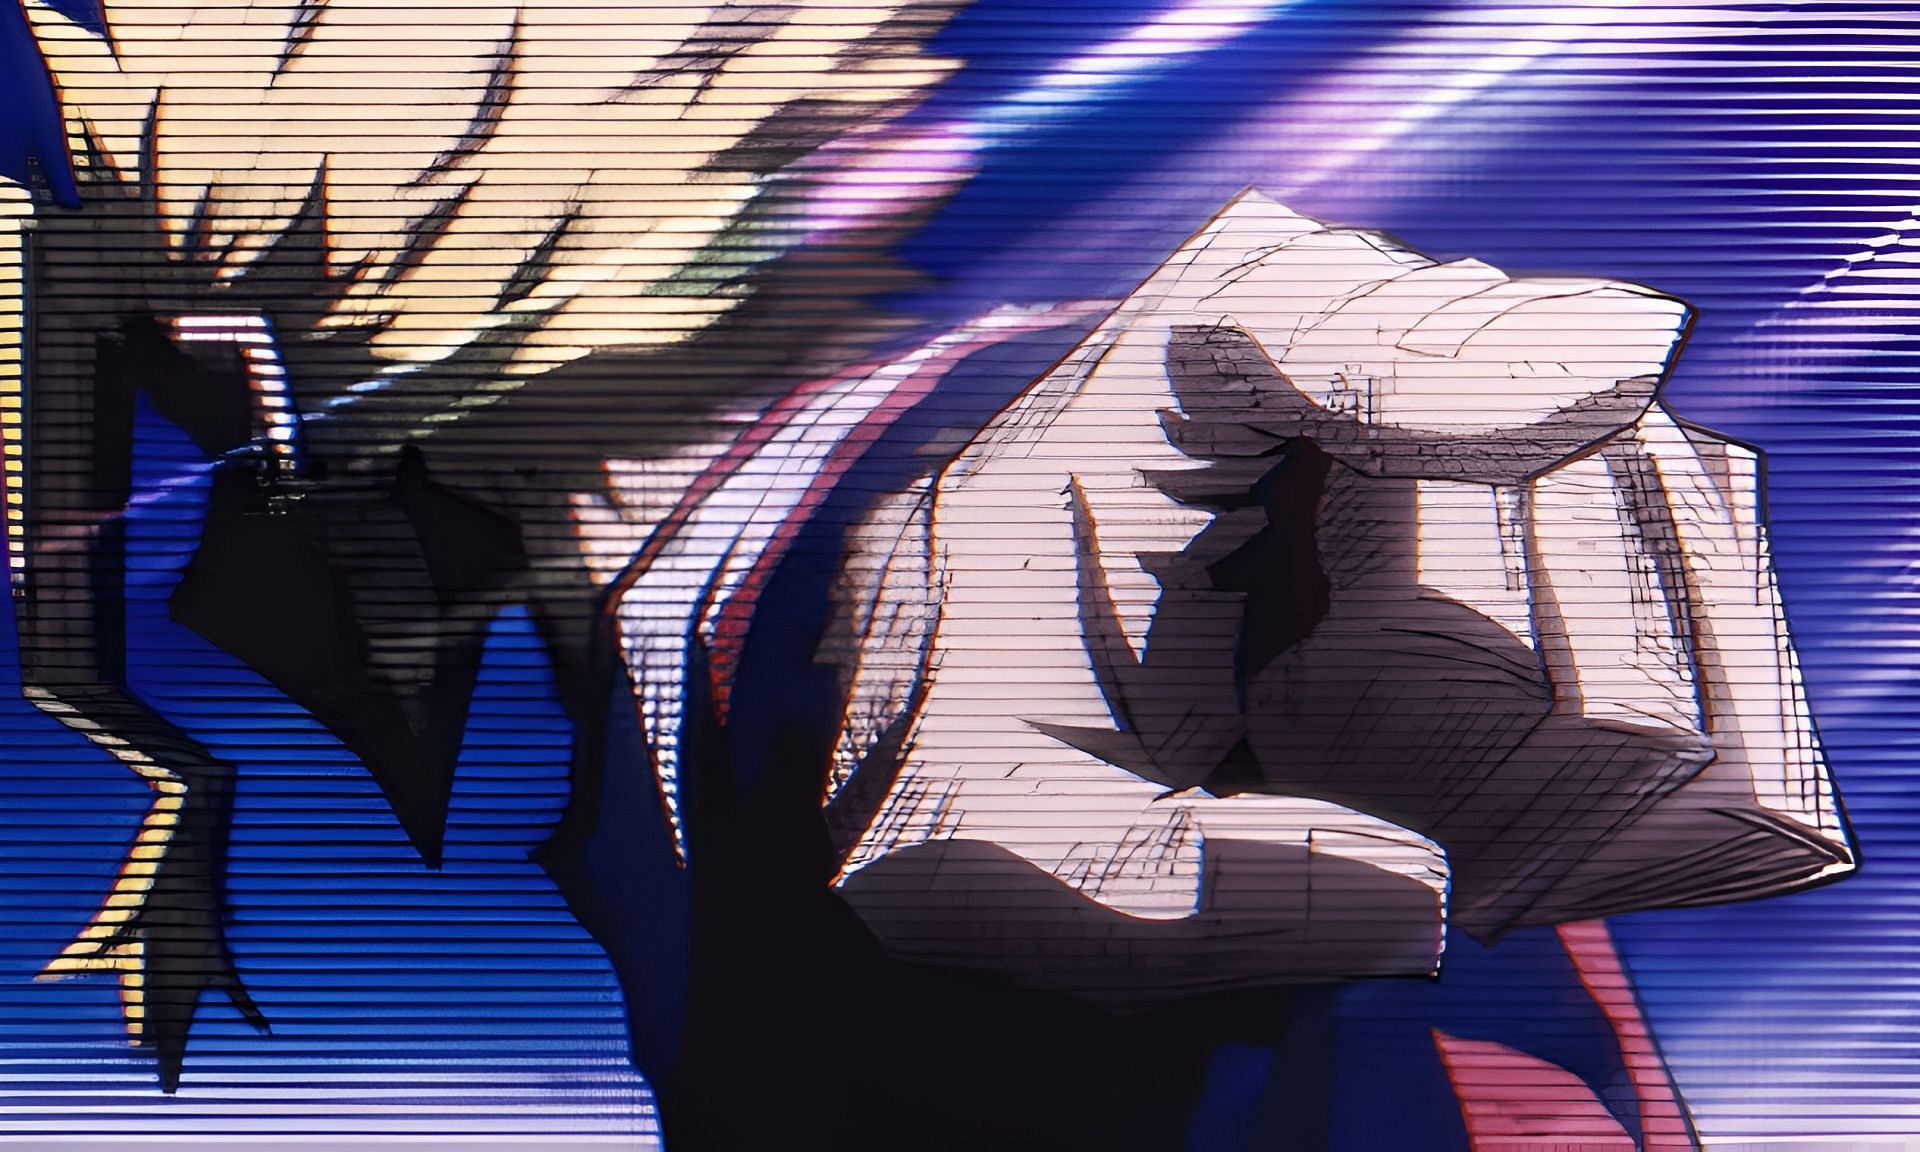 All Might as seen in the anime (Image via Bones)